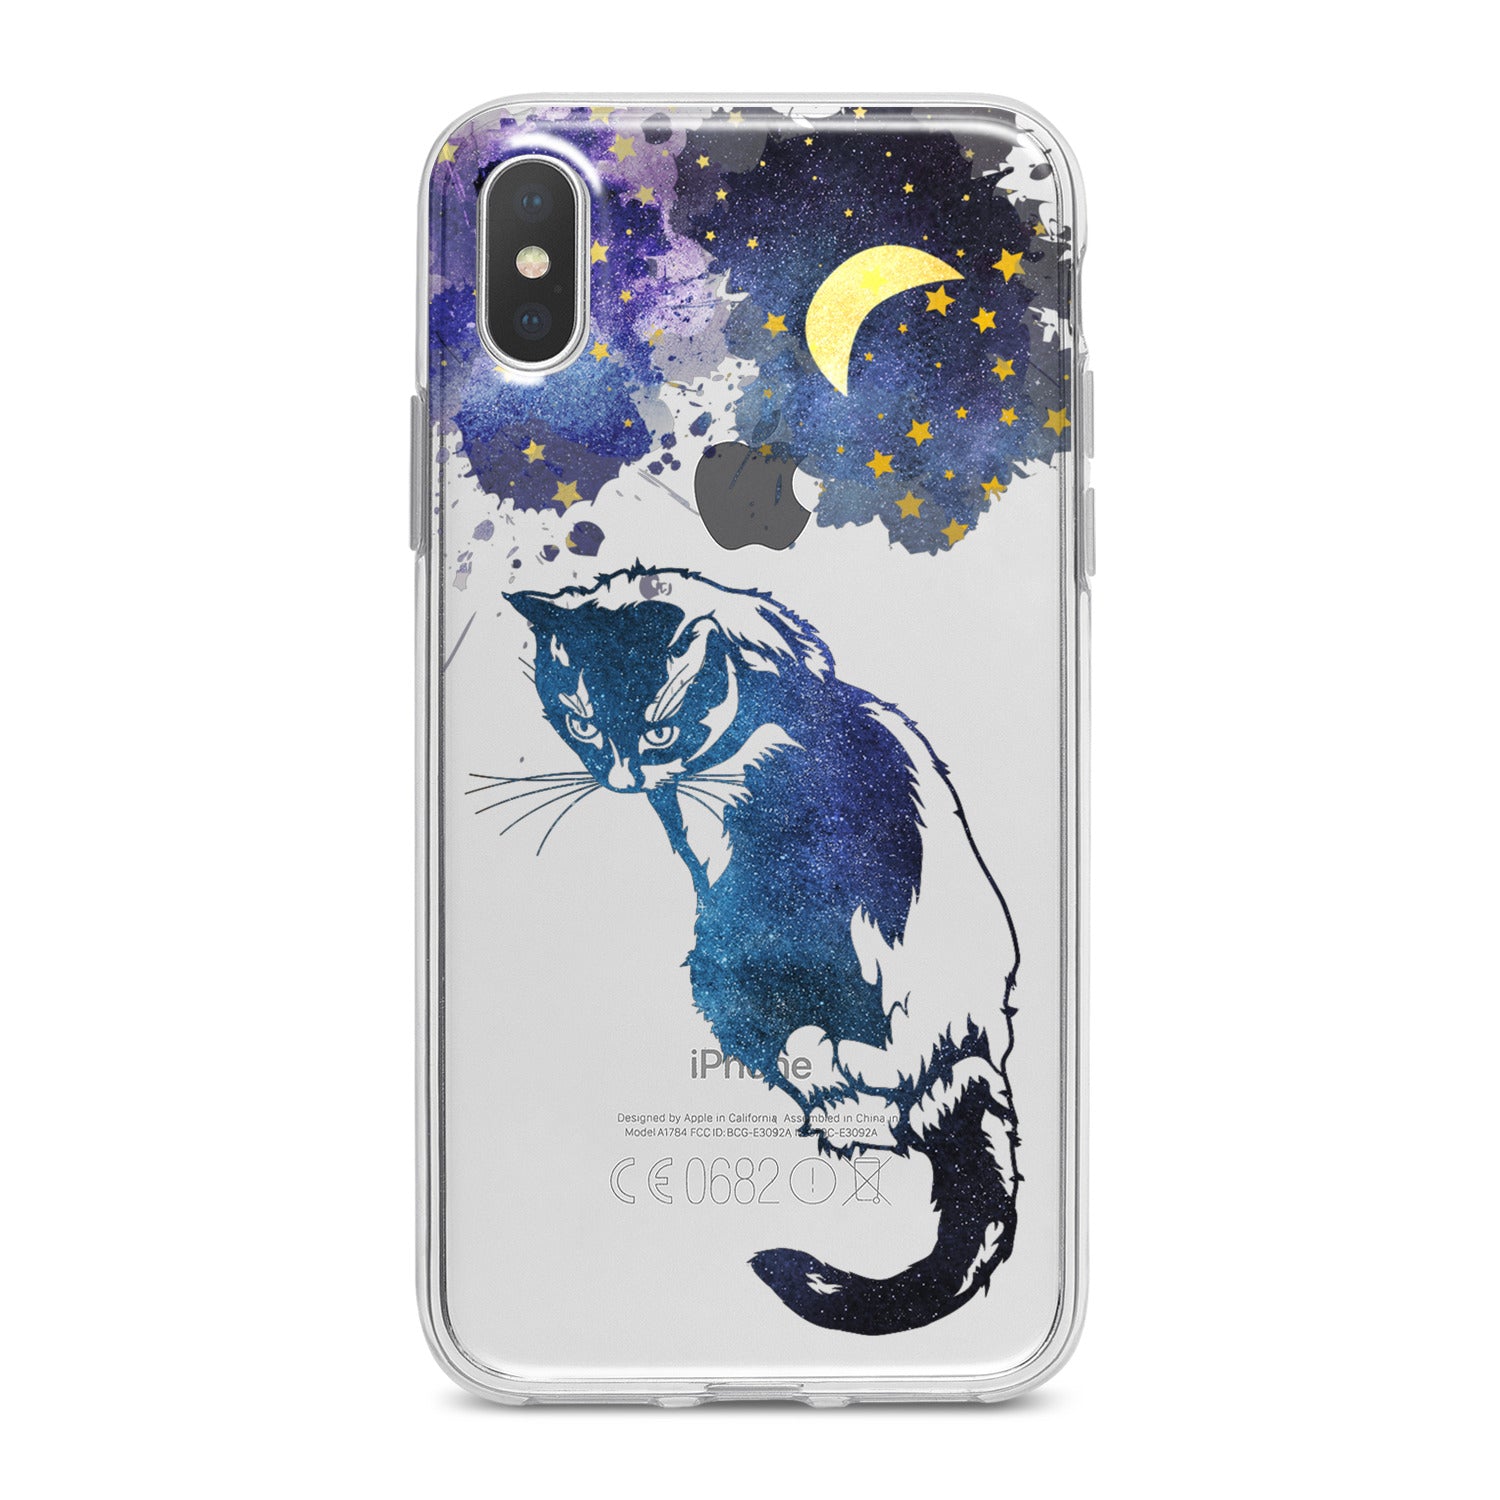 Lex Altern Beautiful Galaxy Cat Phone Case for your iPhone & Android phone.